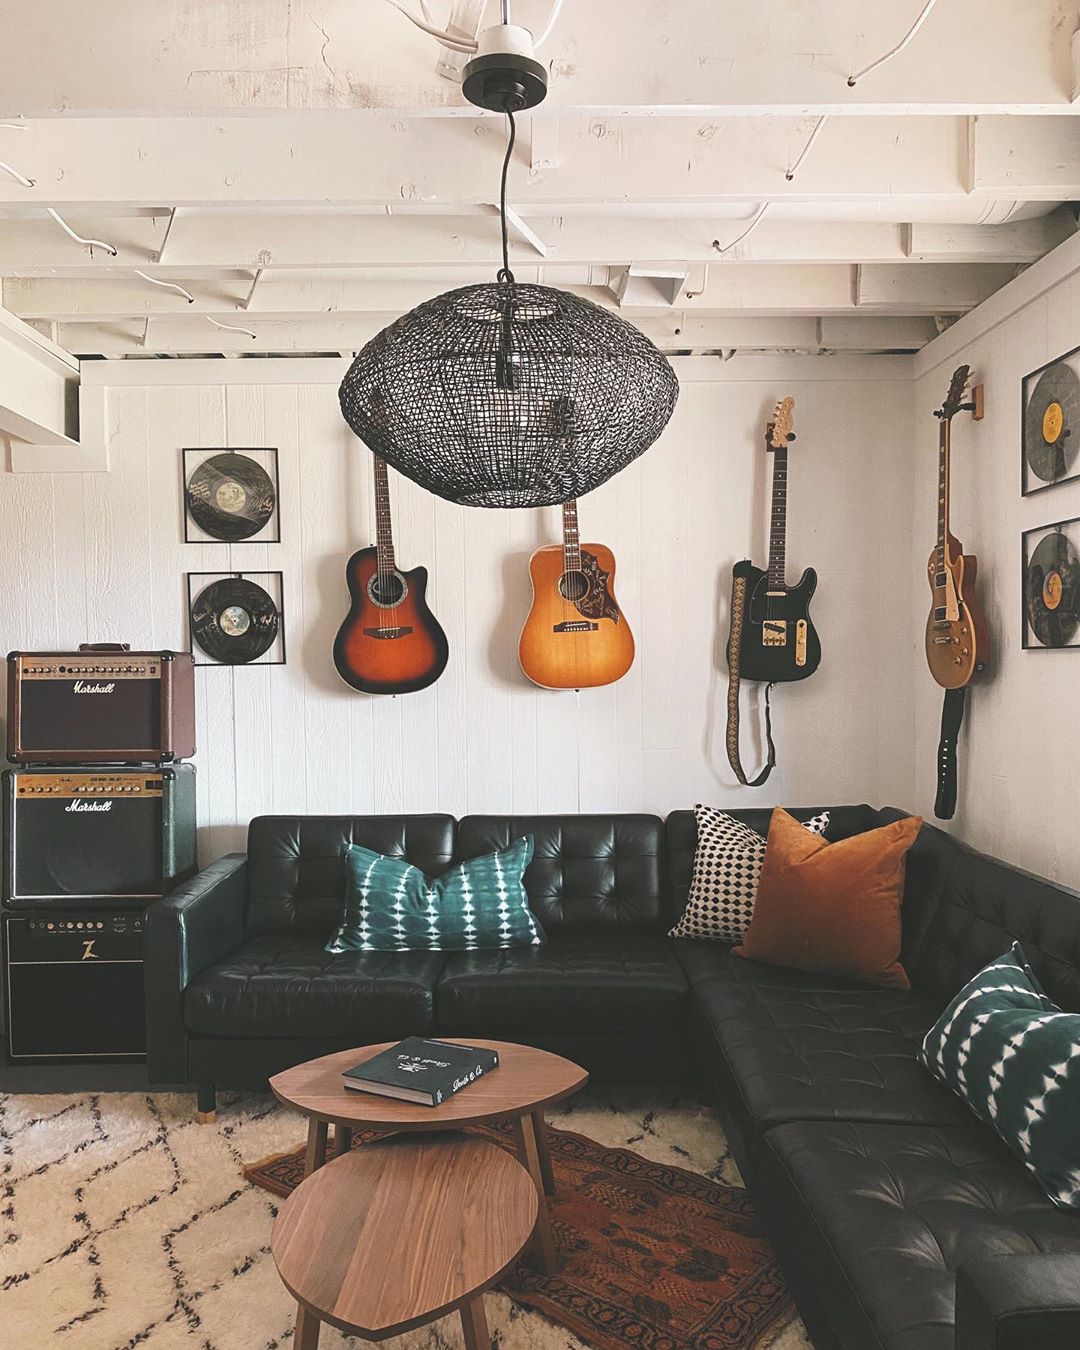 music room in home set up with large seating area and instruments on the wall photo by Instagram user @designandcaroline